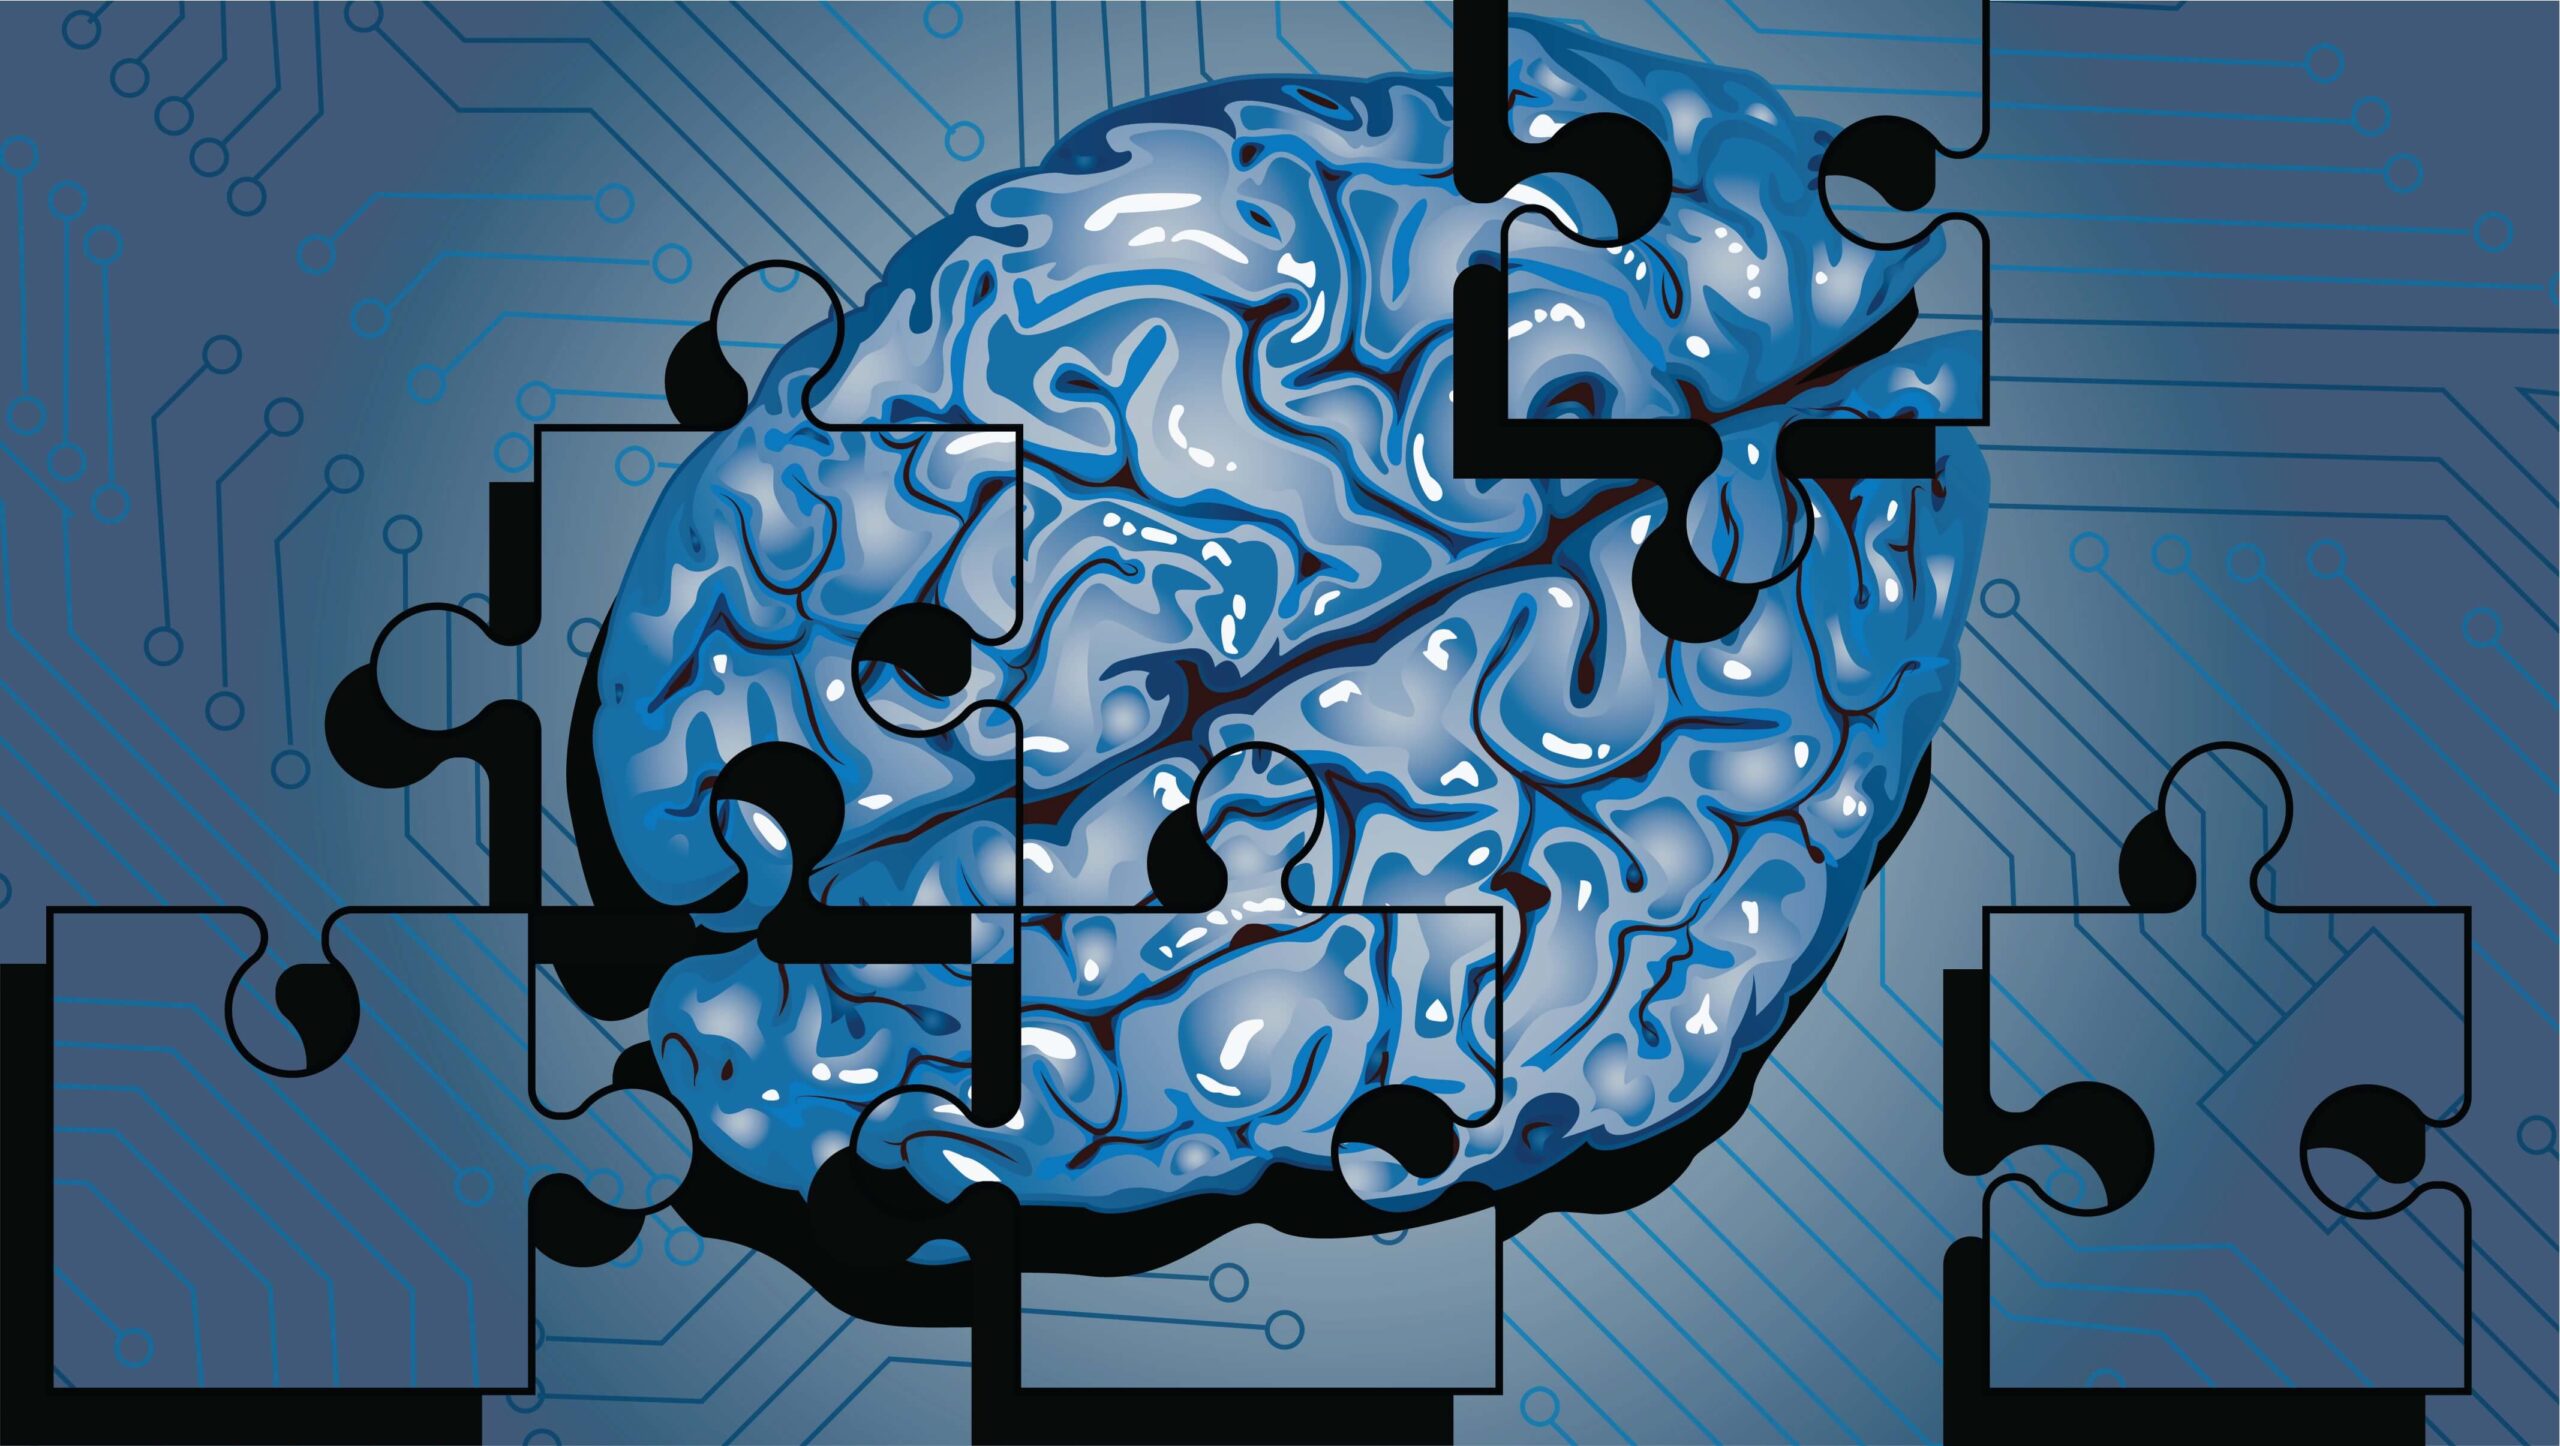 Why is the human brain so difficult to understand? We asked 4  neuroscientists. - Allen Institute